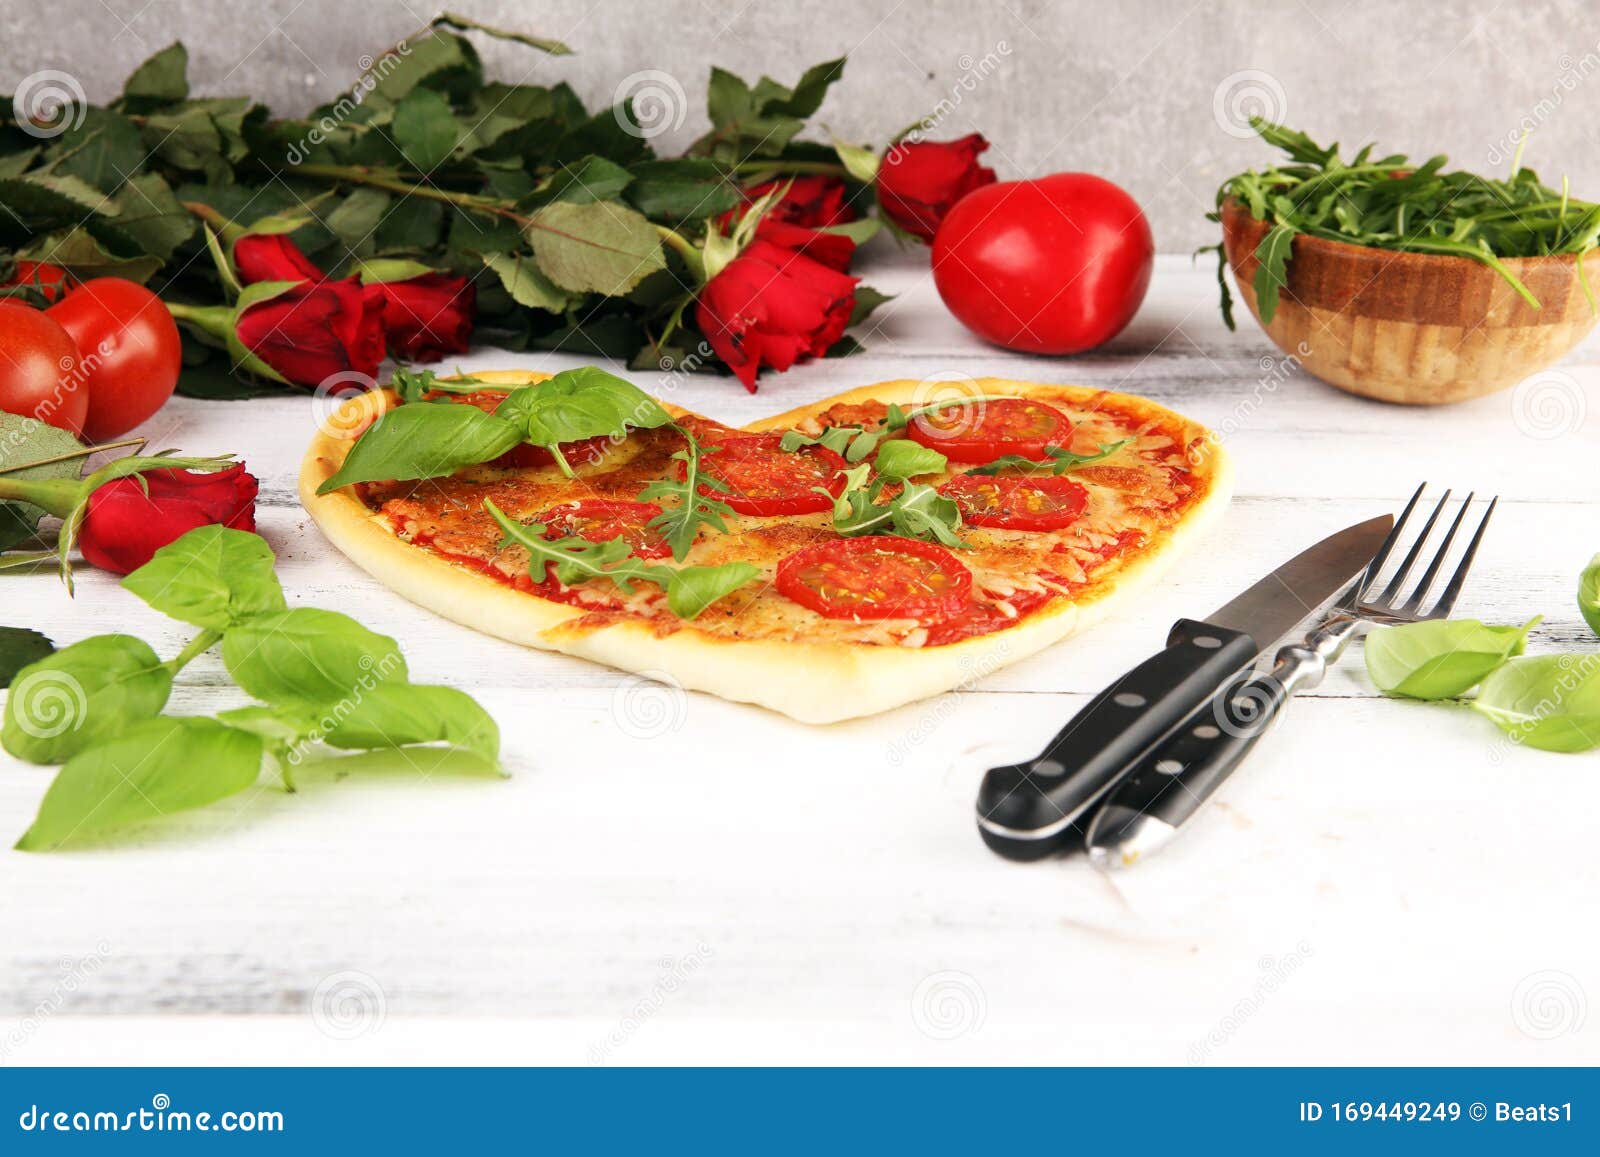 Pizza Heart Shaped Margherita With Tomatoes And Mozzarella Vegetarian Food Concept Of Romantic Love Pizza For Valentines Day Stock Image Image Of Valentine Baked 169449249